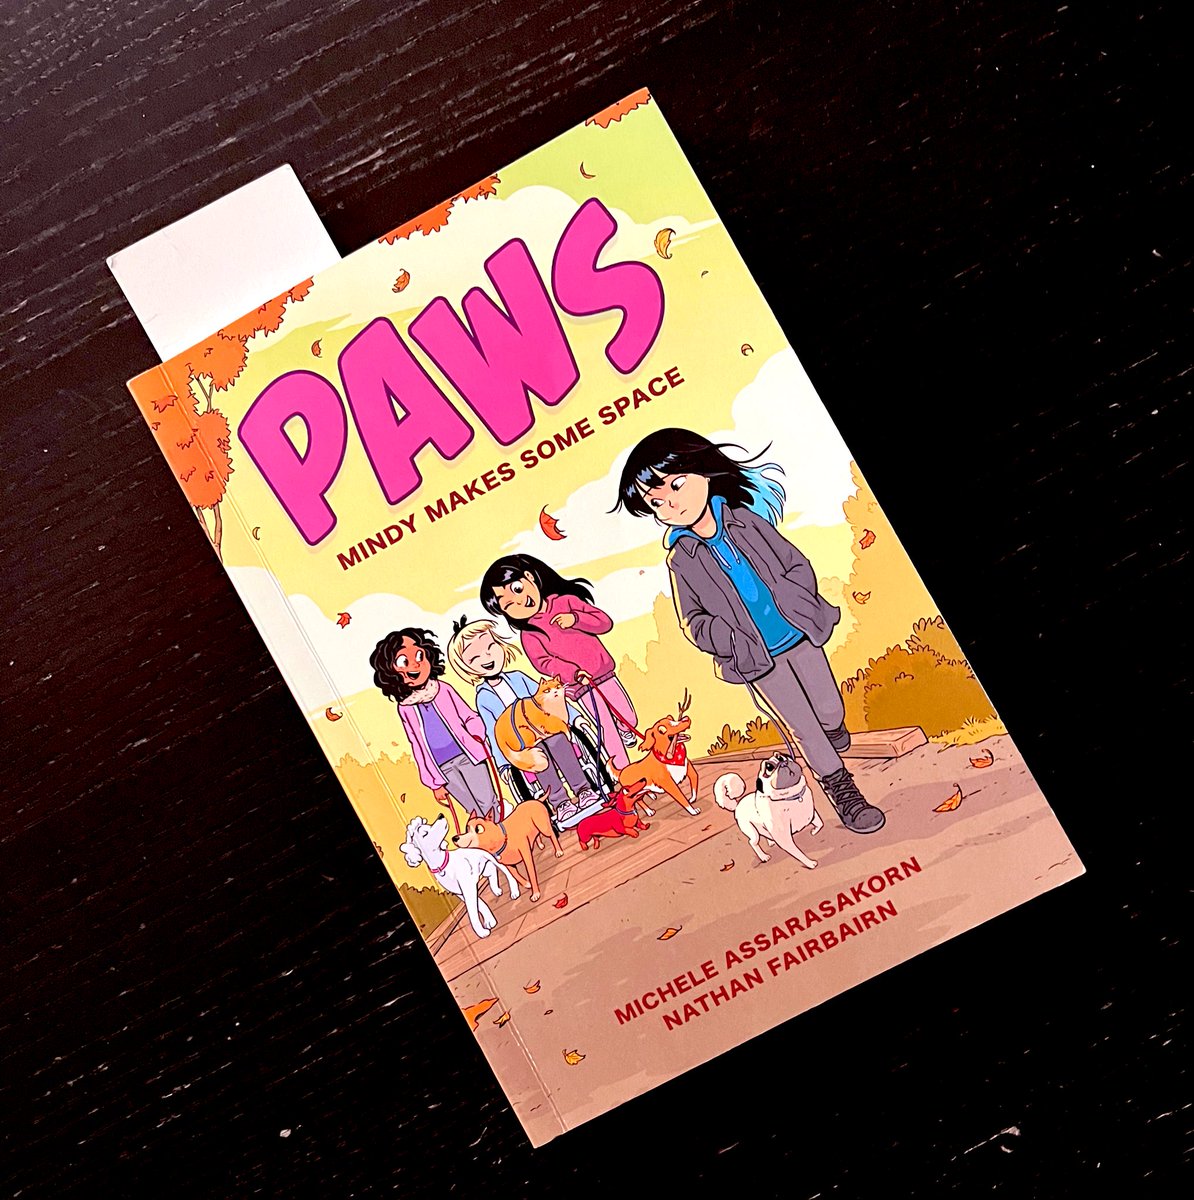 Got the brand new volume of the PAWS in the mail a few days ago from @nathanfairbairn It’s a HUGE hit in the Samnee house. Our kids have already read it cover to cover multiple times 😊📚 Thanks again, Nathan! Wonderful work by you & @msassyk 🐶 🐾 ♥️